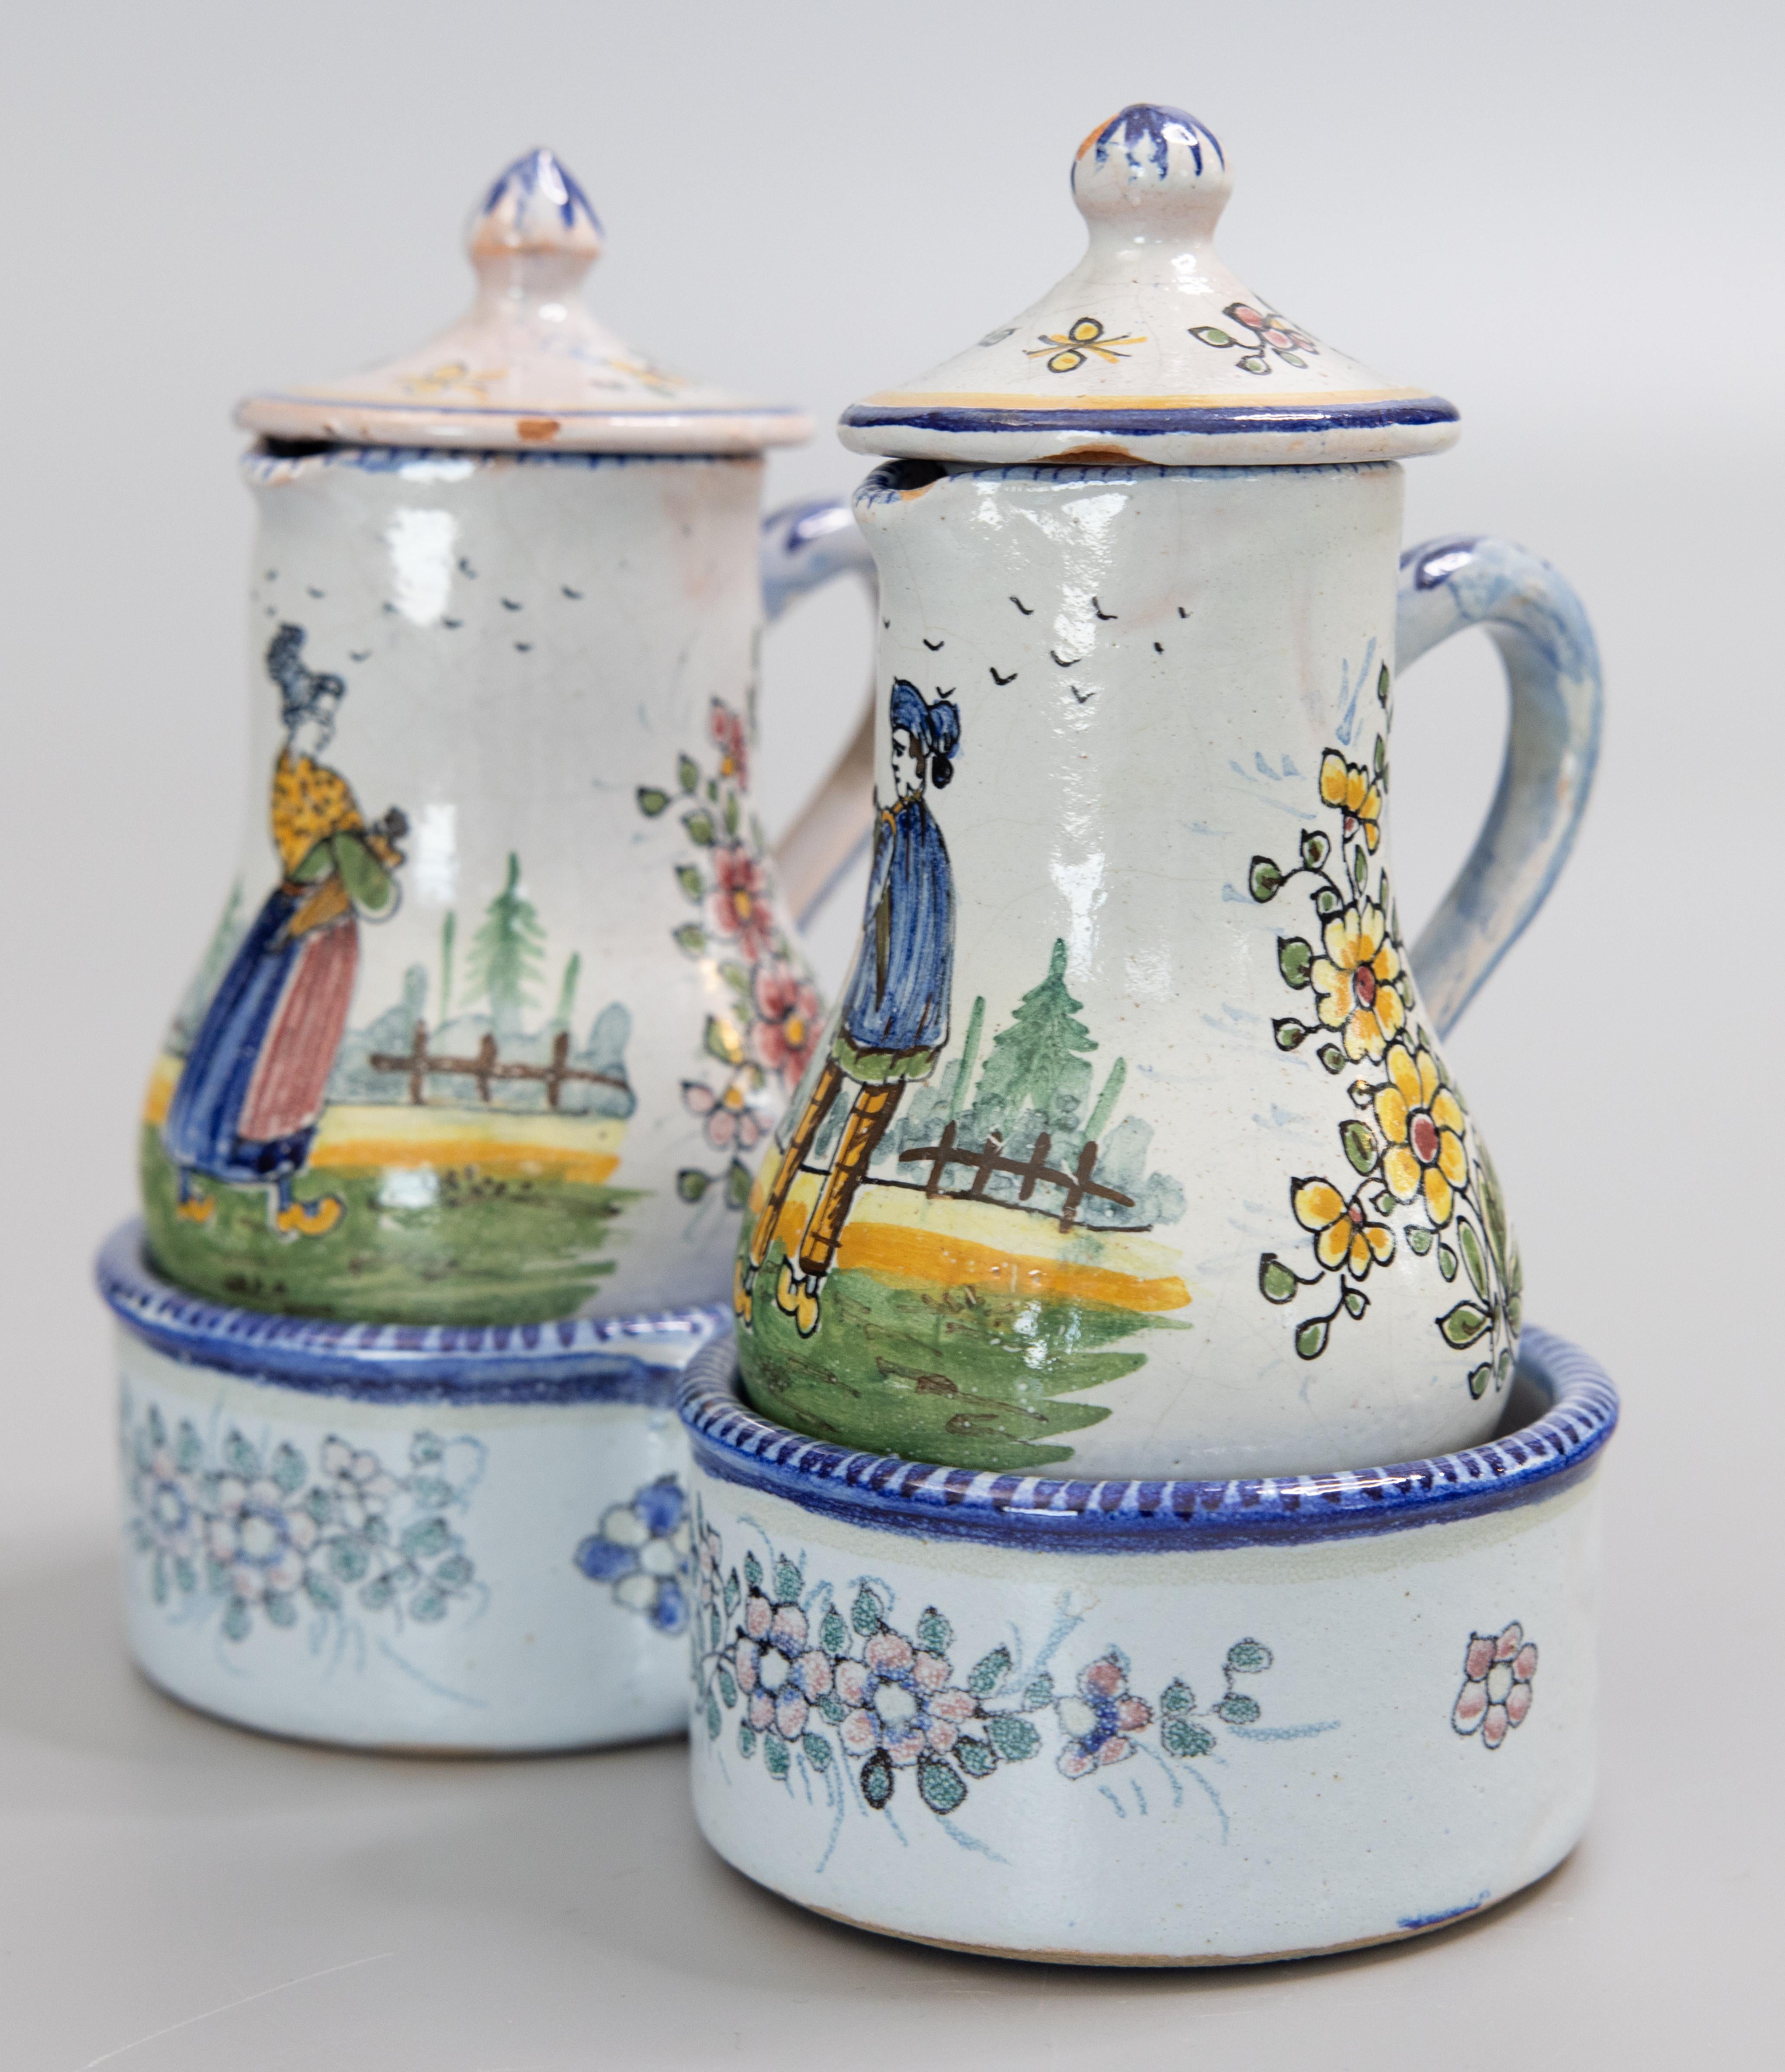 A charming 19th Century French Quimper faience oil and vinegar handled jugs cruet set and presentier double dish stand. Signed by the artist on the underside. The stand has a hand painted garland of flowers and holds two lidded ewers or small